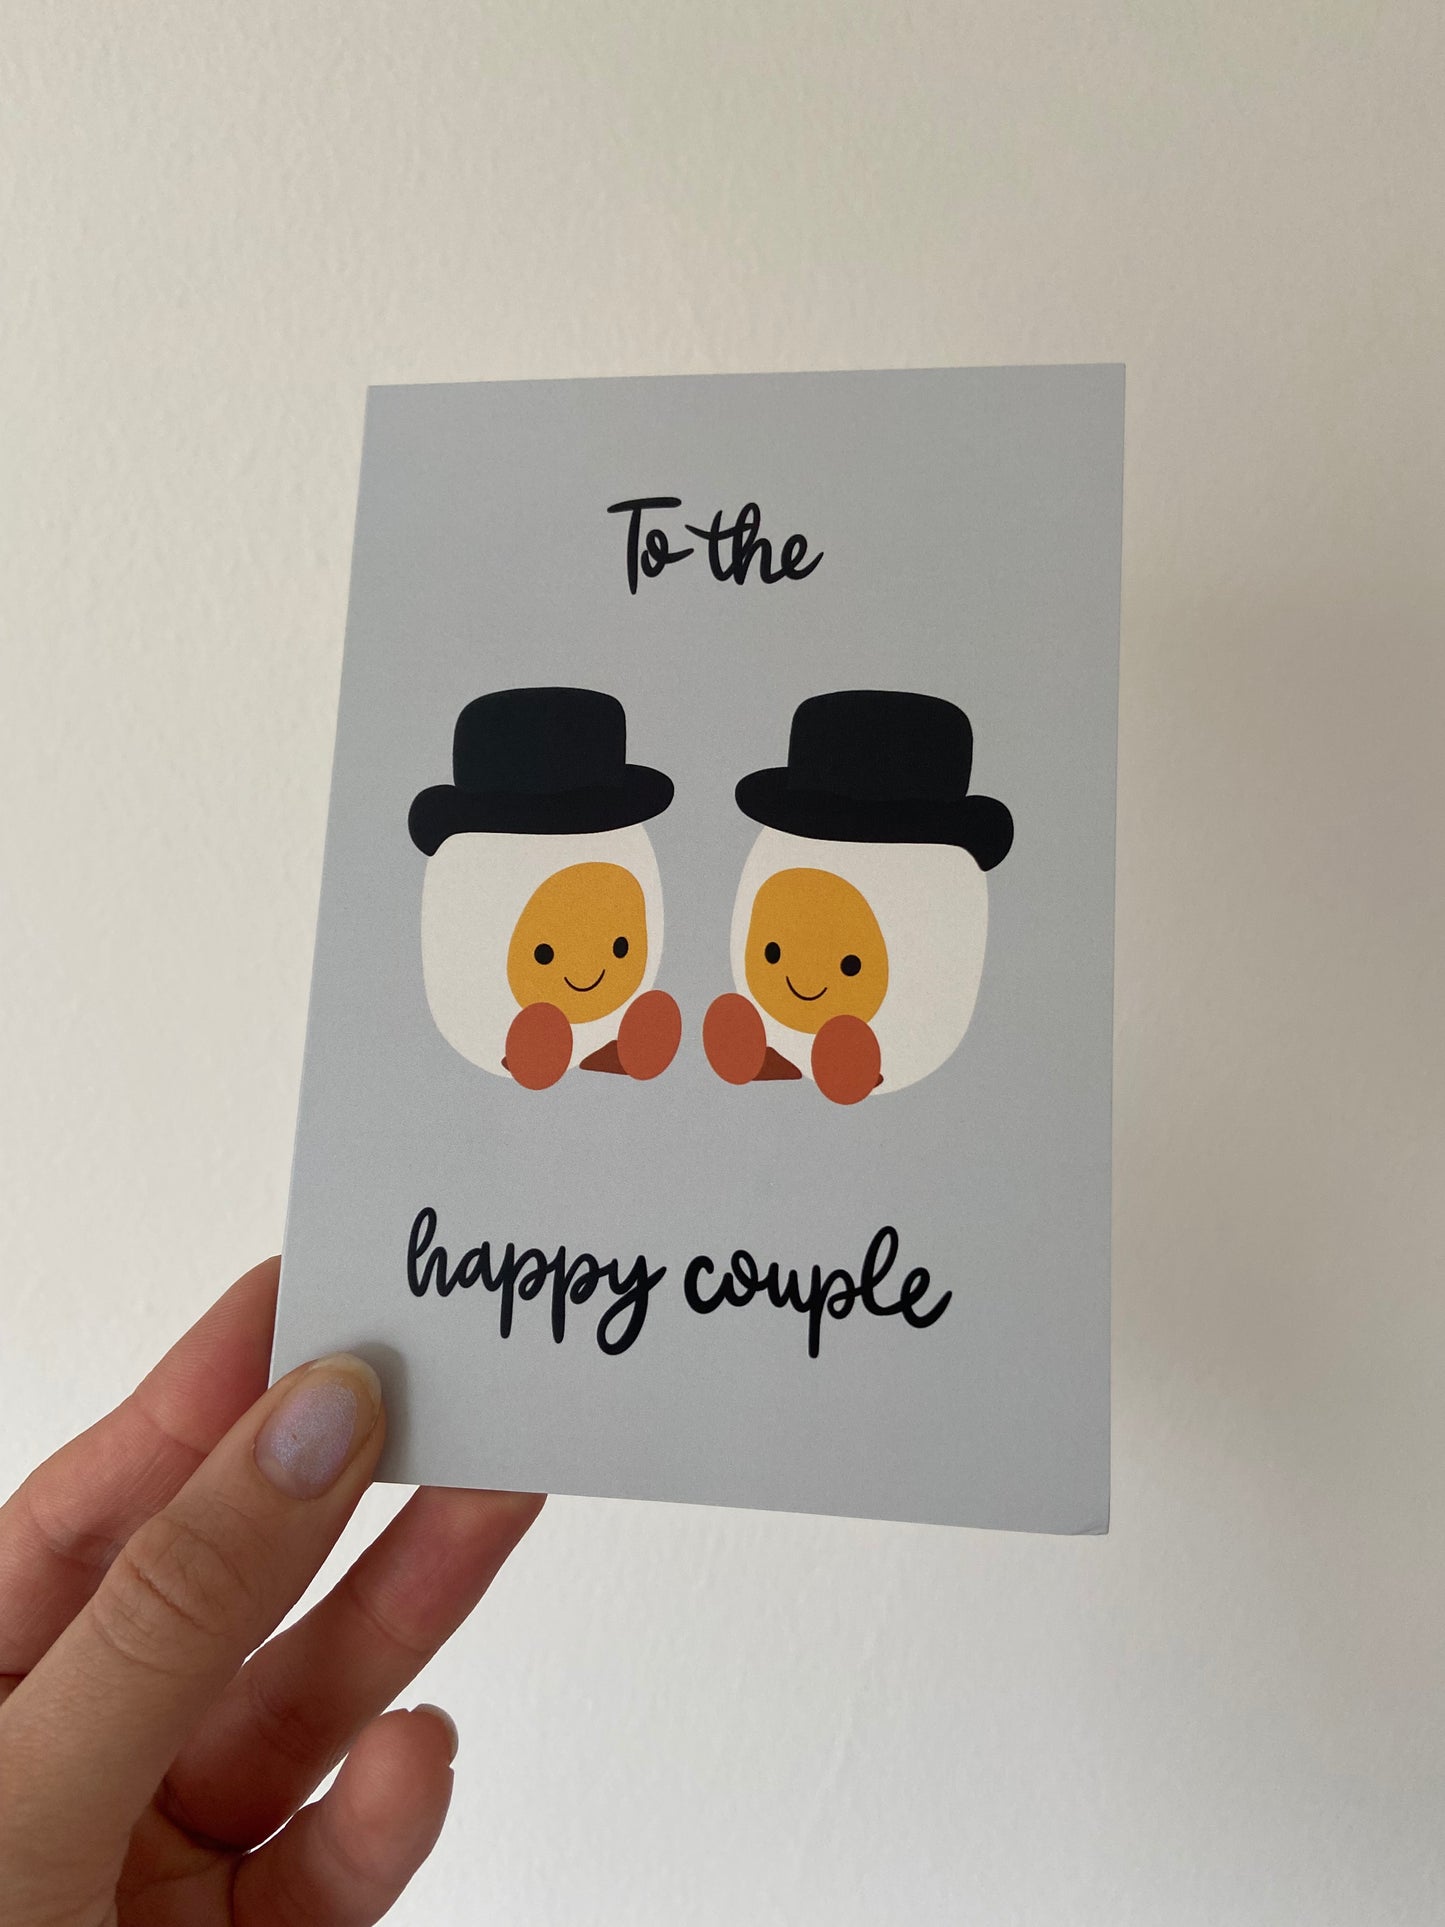 To the happy couple card. A6.